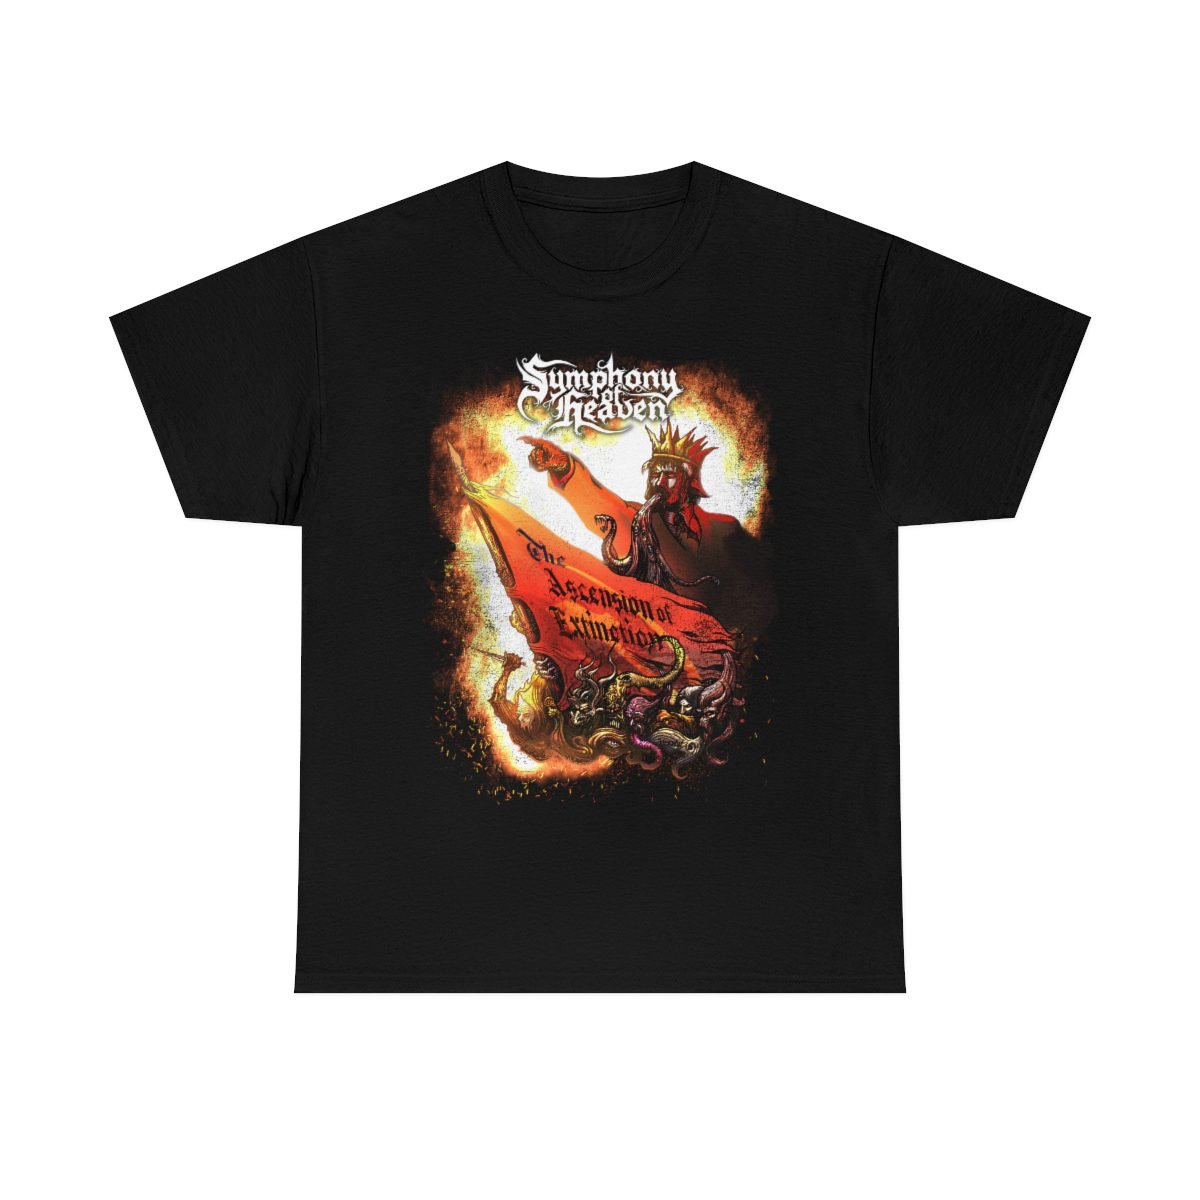 Symphony of Heaven – The Ascension of Extinction Short Sleeve Tshirt (5000)